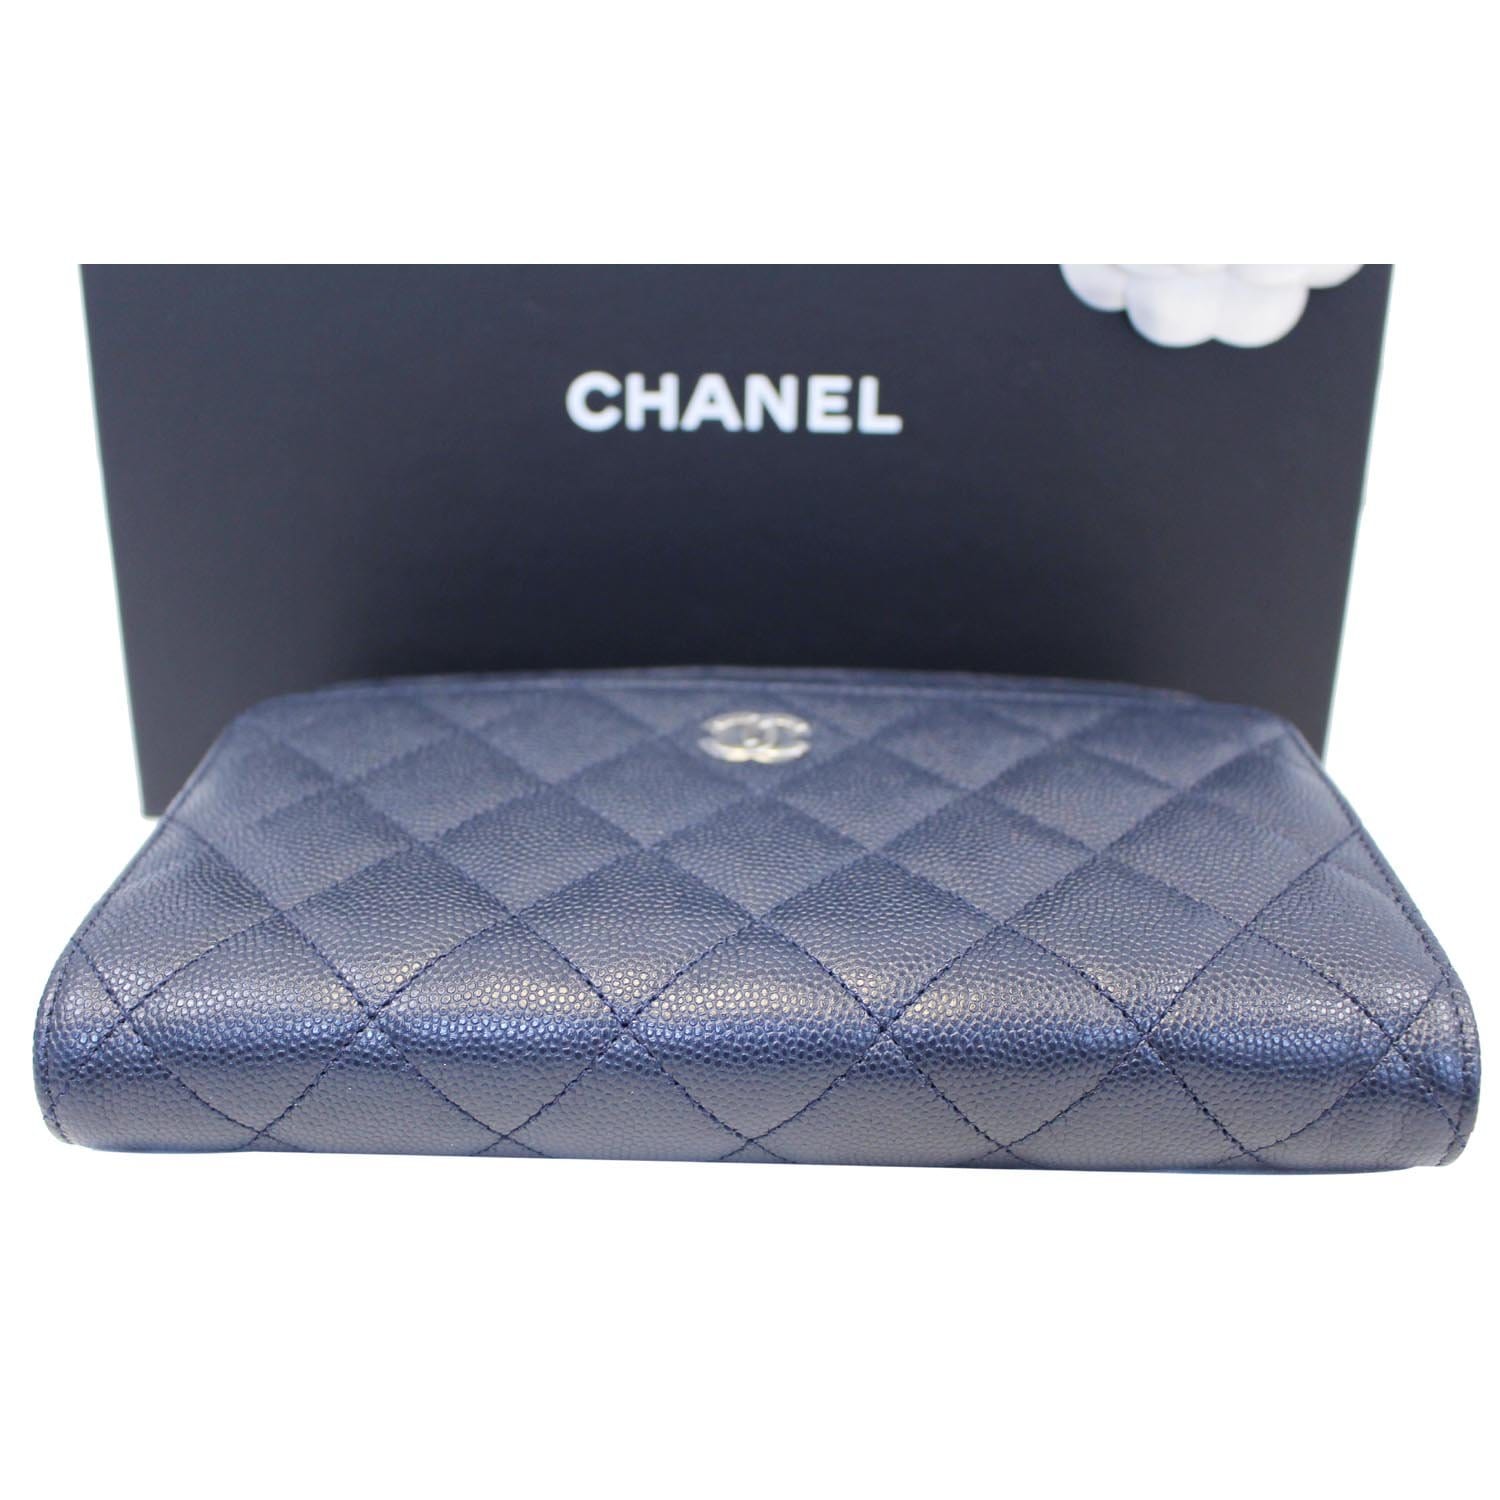 CHANEL, Bags, C H A N E L Navy Wallet On Chain Crossbody Bag